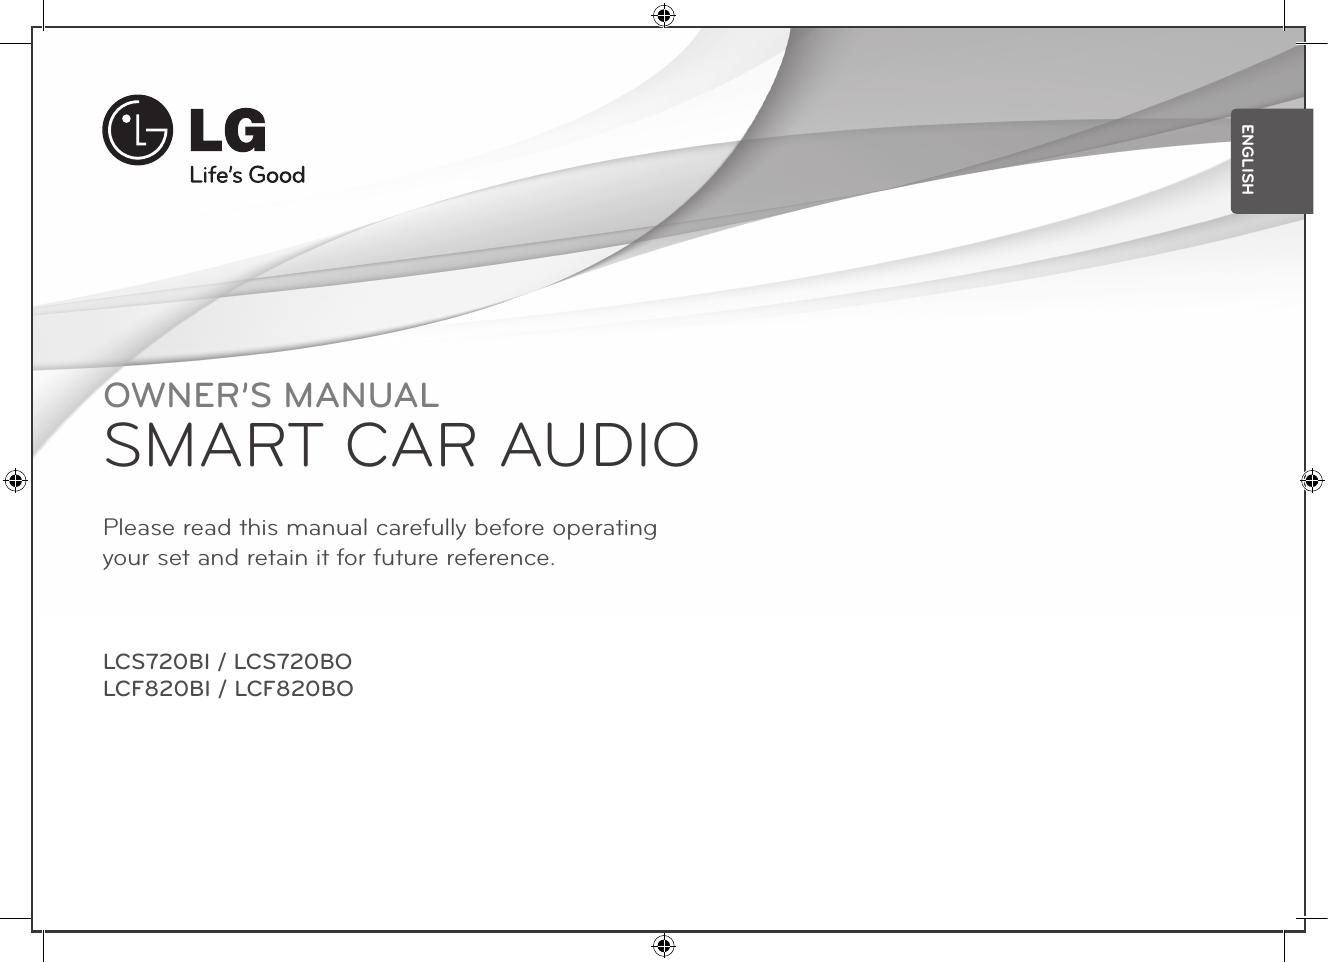 OWNER’S MANUALSMART CAR AUDIOPlease read this manual carefully before operating  your set and retain it for future reference.LCS720BI / LCS720BOLCF820BI / LCF820BOENGLISH